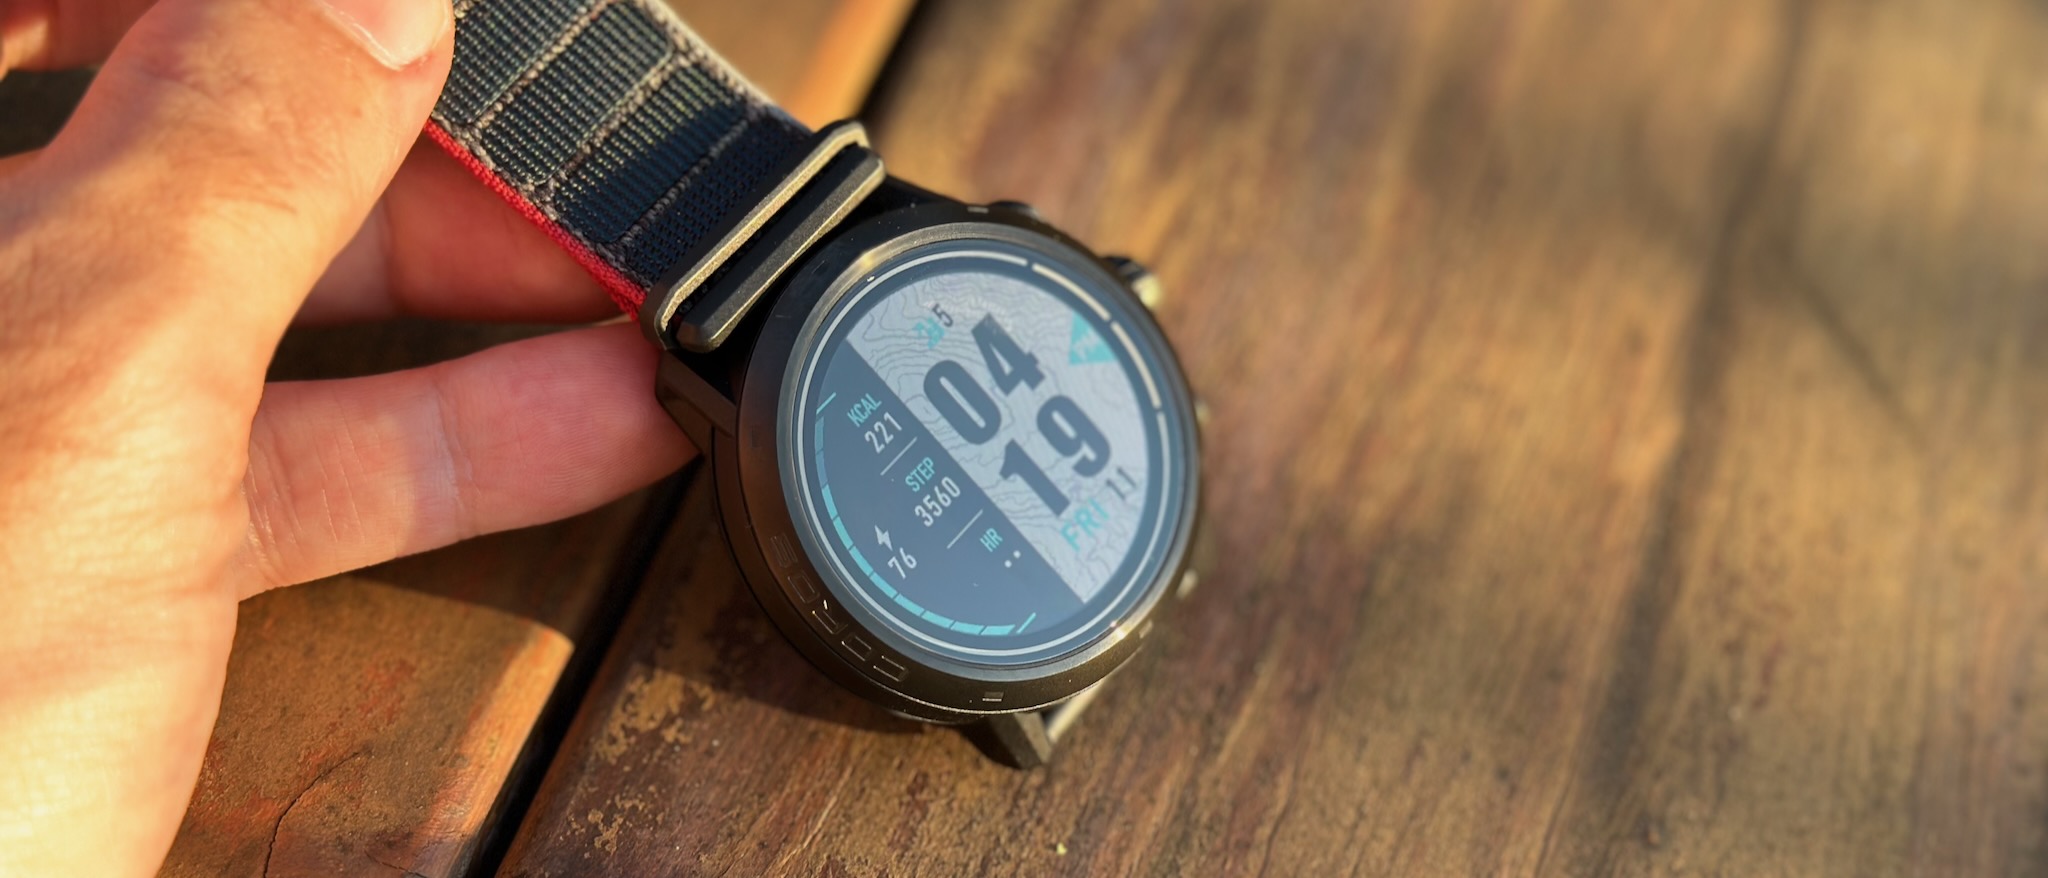 COROS APEX 2 Pro review: Casual runners need not apply